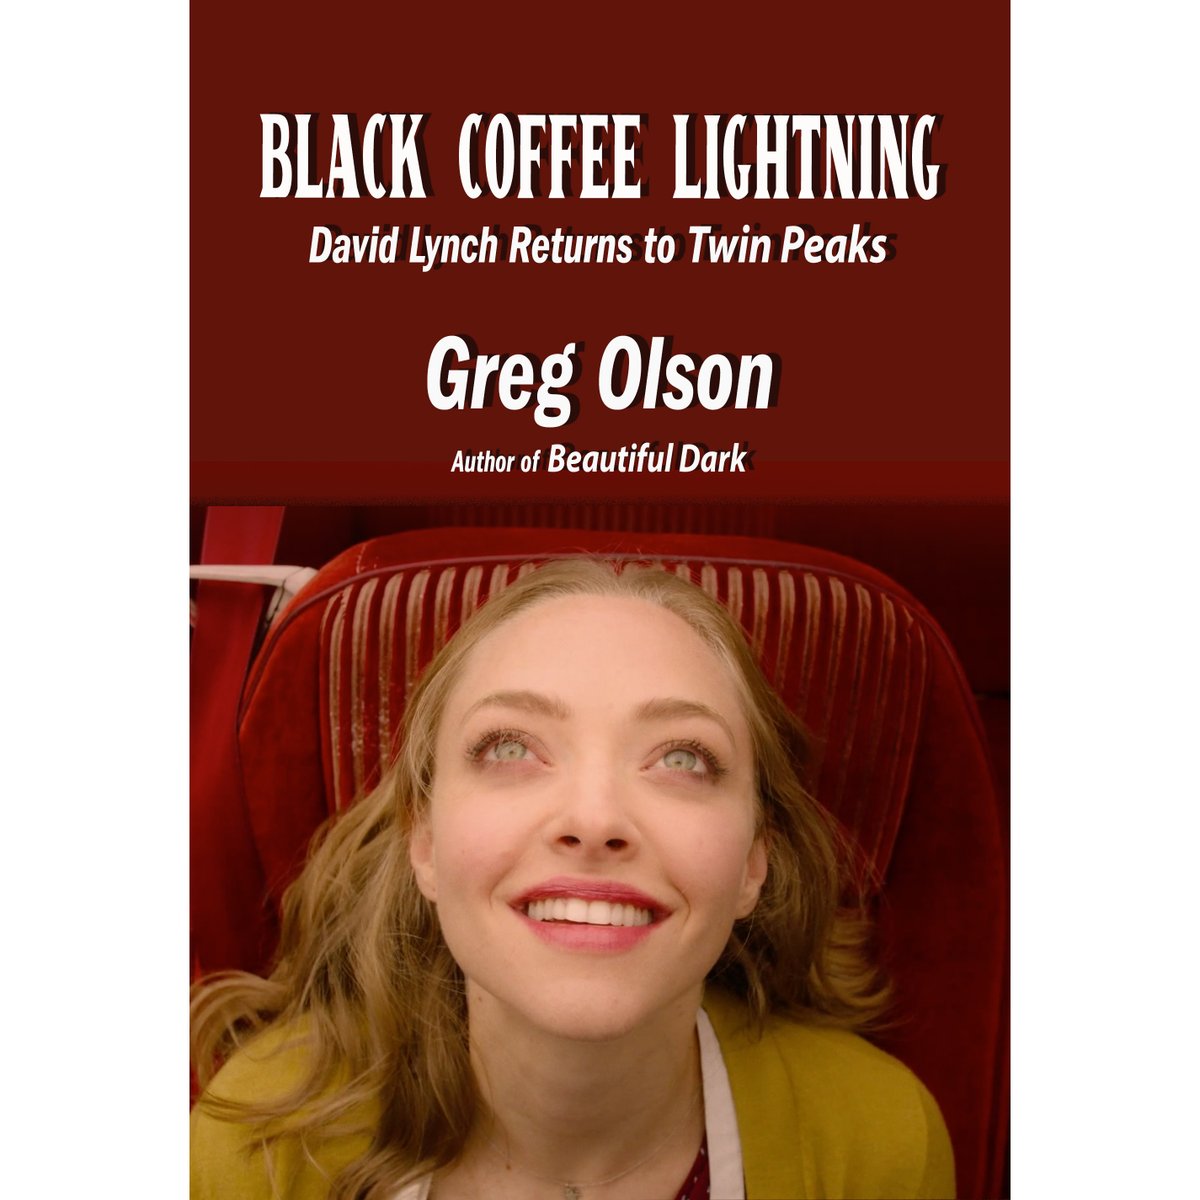 Are you ready for Season 4 of #TwinPeaks? You better brush up on #TheReturn before the new episodes hit ShowFlix. Read Greg Olson's book which is his reading of #davidlynch #markfrost's #TheReturn. Running a $10 off sale since Season 4 has 10 episodes. bluerosemag.com/?product=black…